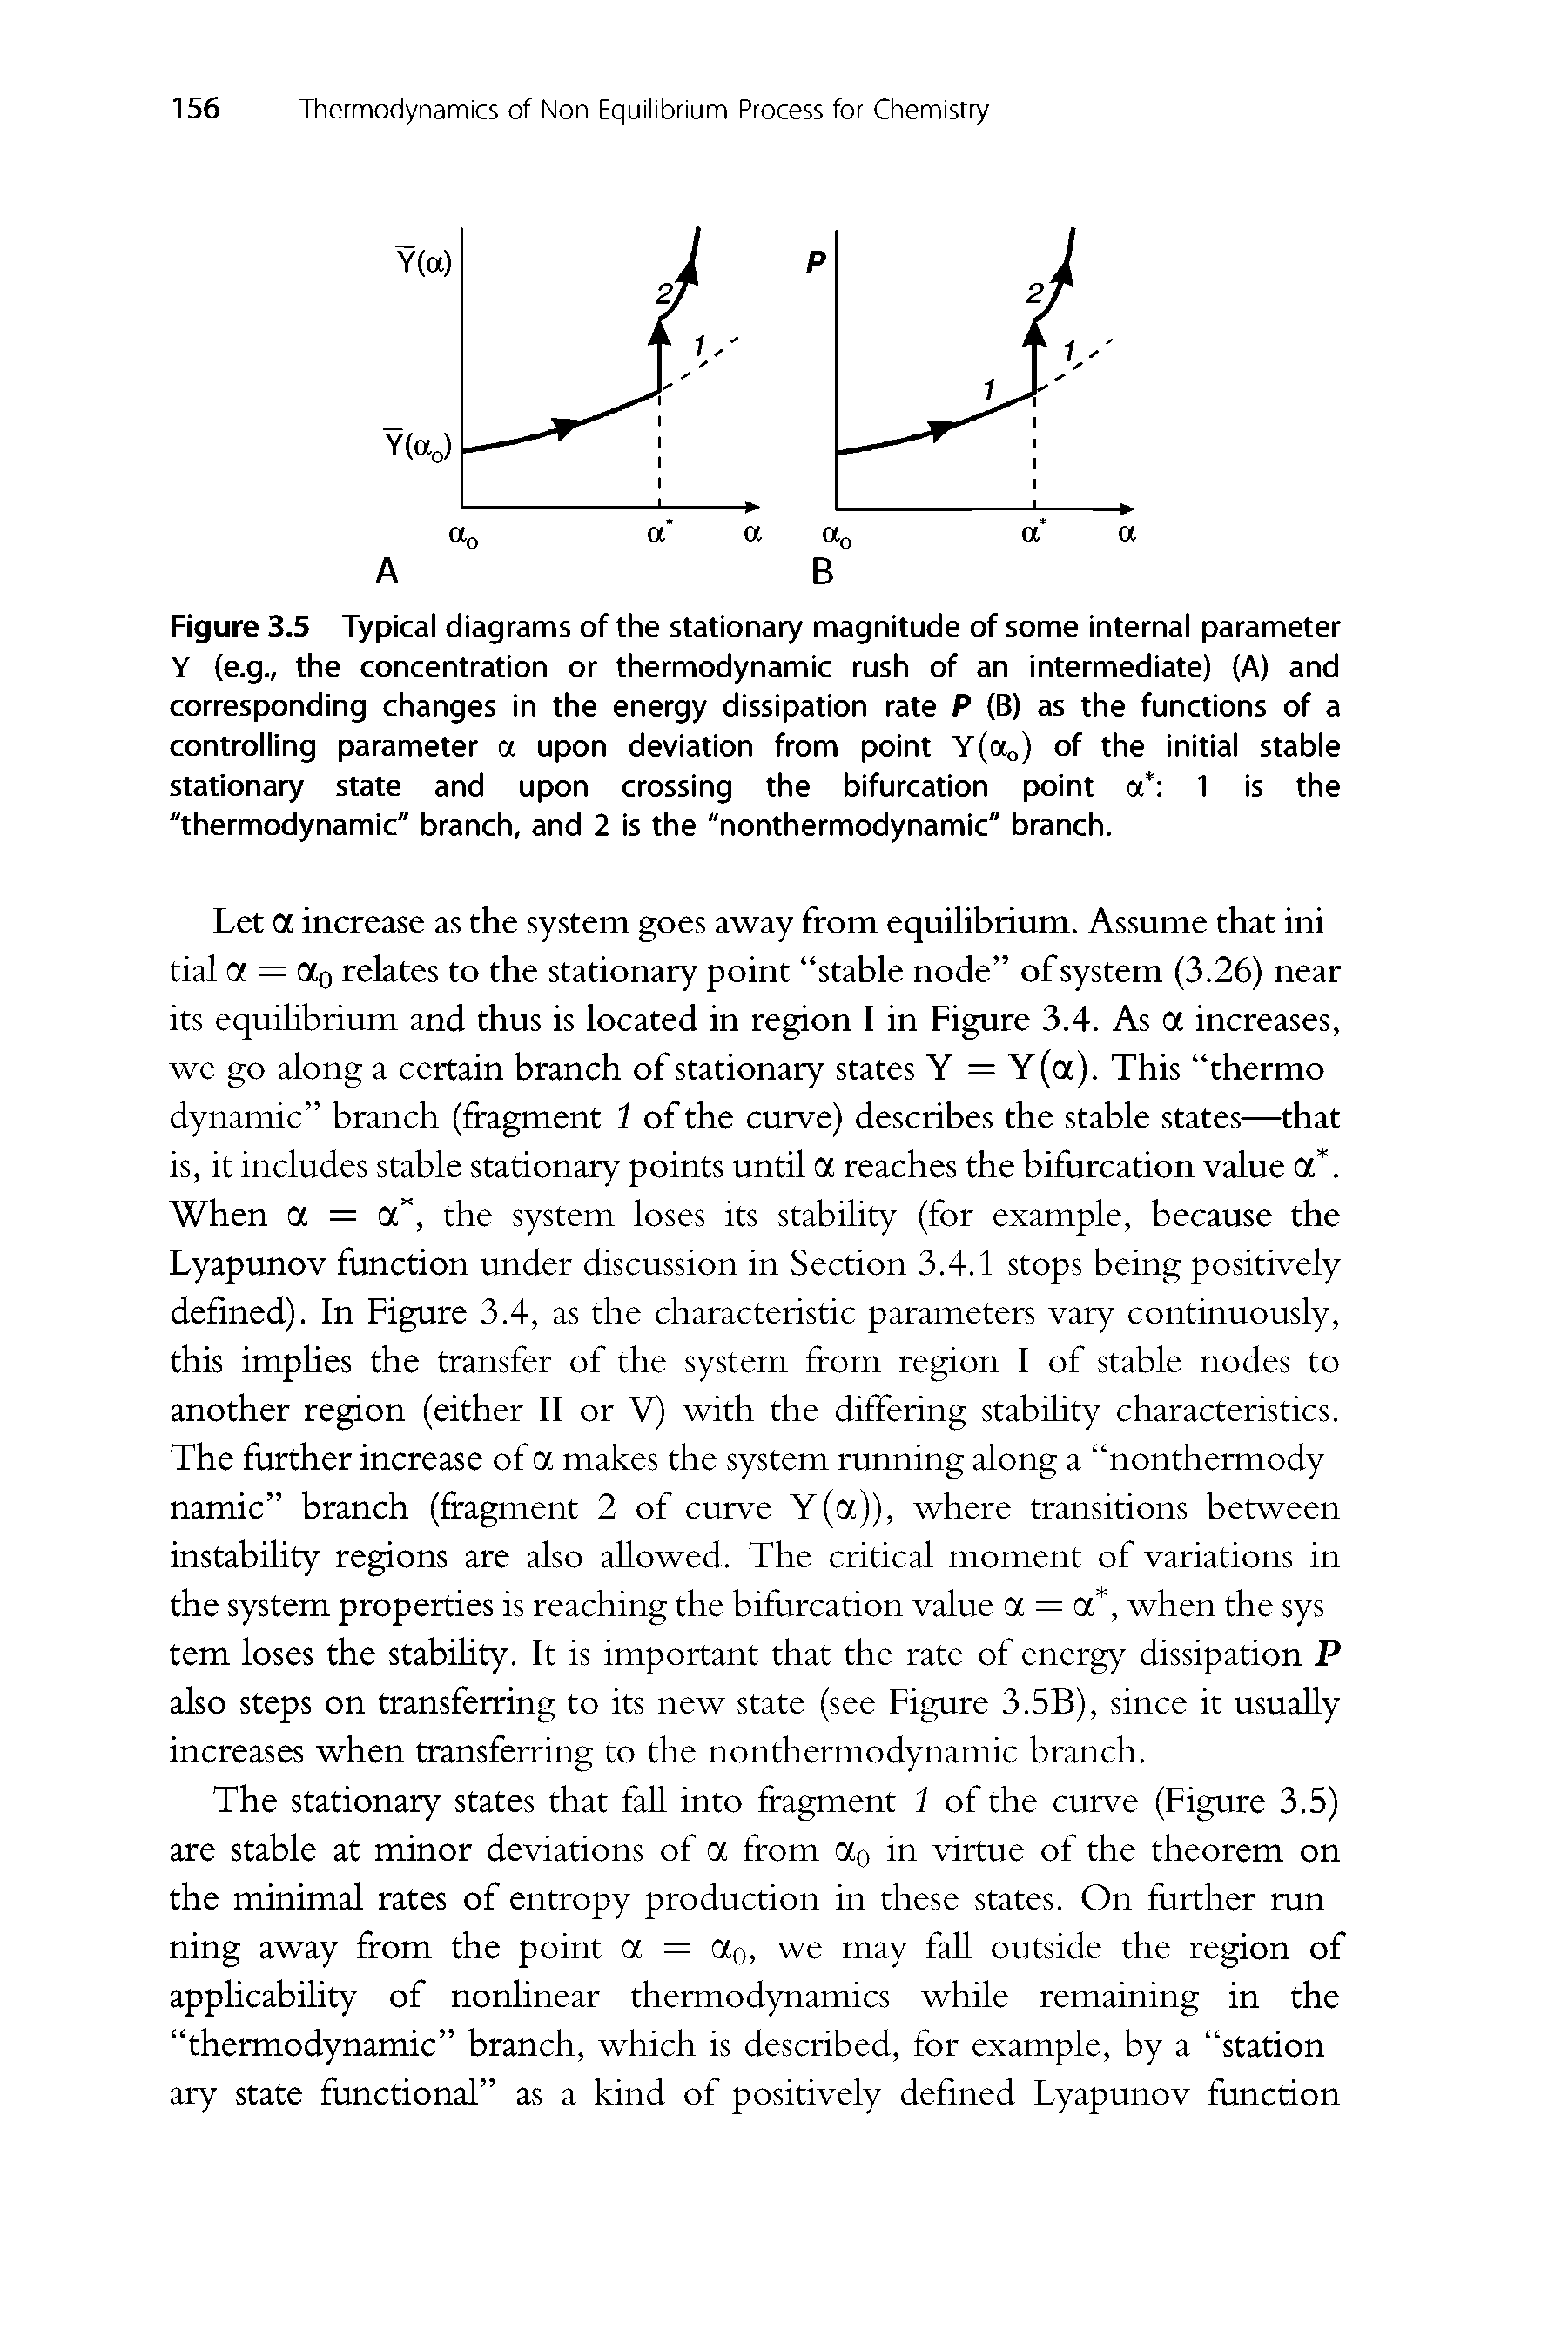 Figure 3.5 Typical diagrams of the stationary magnitude of some internal parameter Y (e.g., the concentration or thermodynamic rush of an intermediate) (A) and corresponding changes in the energy dissipation rate P (B) as the functions of a controlling parameter a upon deviation from point Y( o) of the initial stable stationary state and upon crossing the bifurcation point a 1 is the...